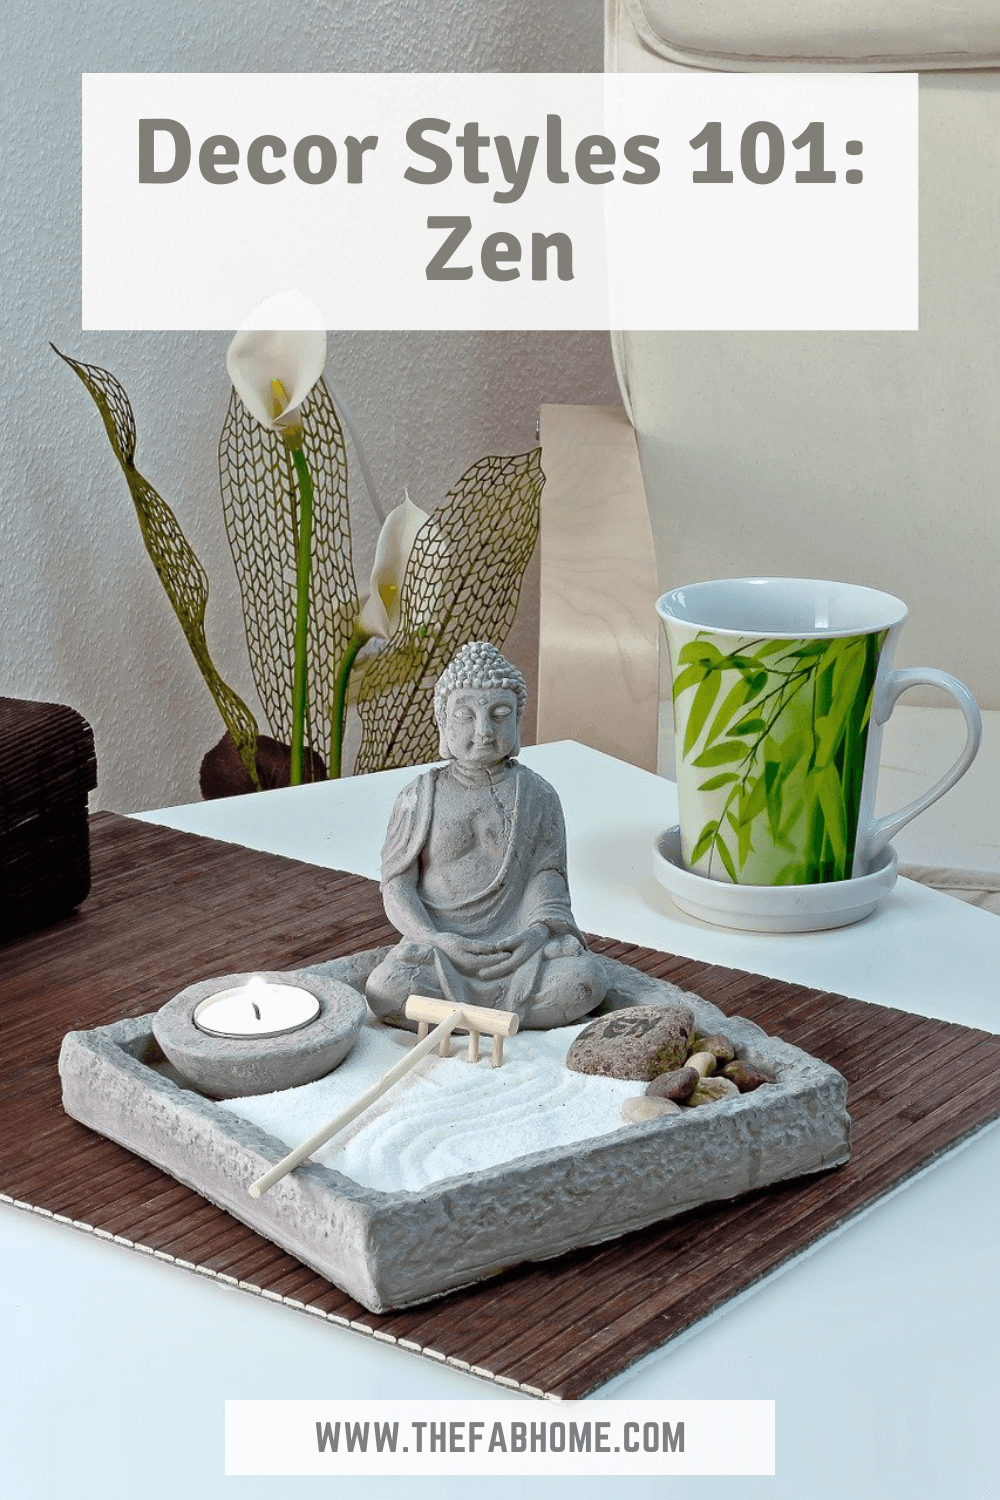 Create your very own peaceful haven at home with the Zen decor style! Get inspired by East Asian interiors to live the simple, clutter-free life!